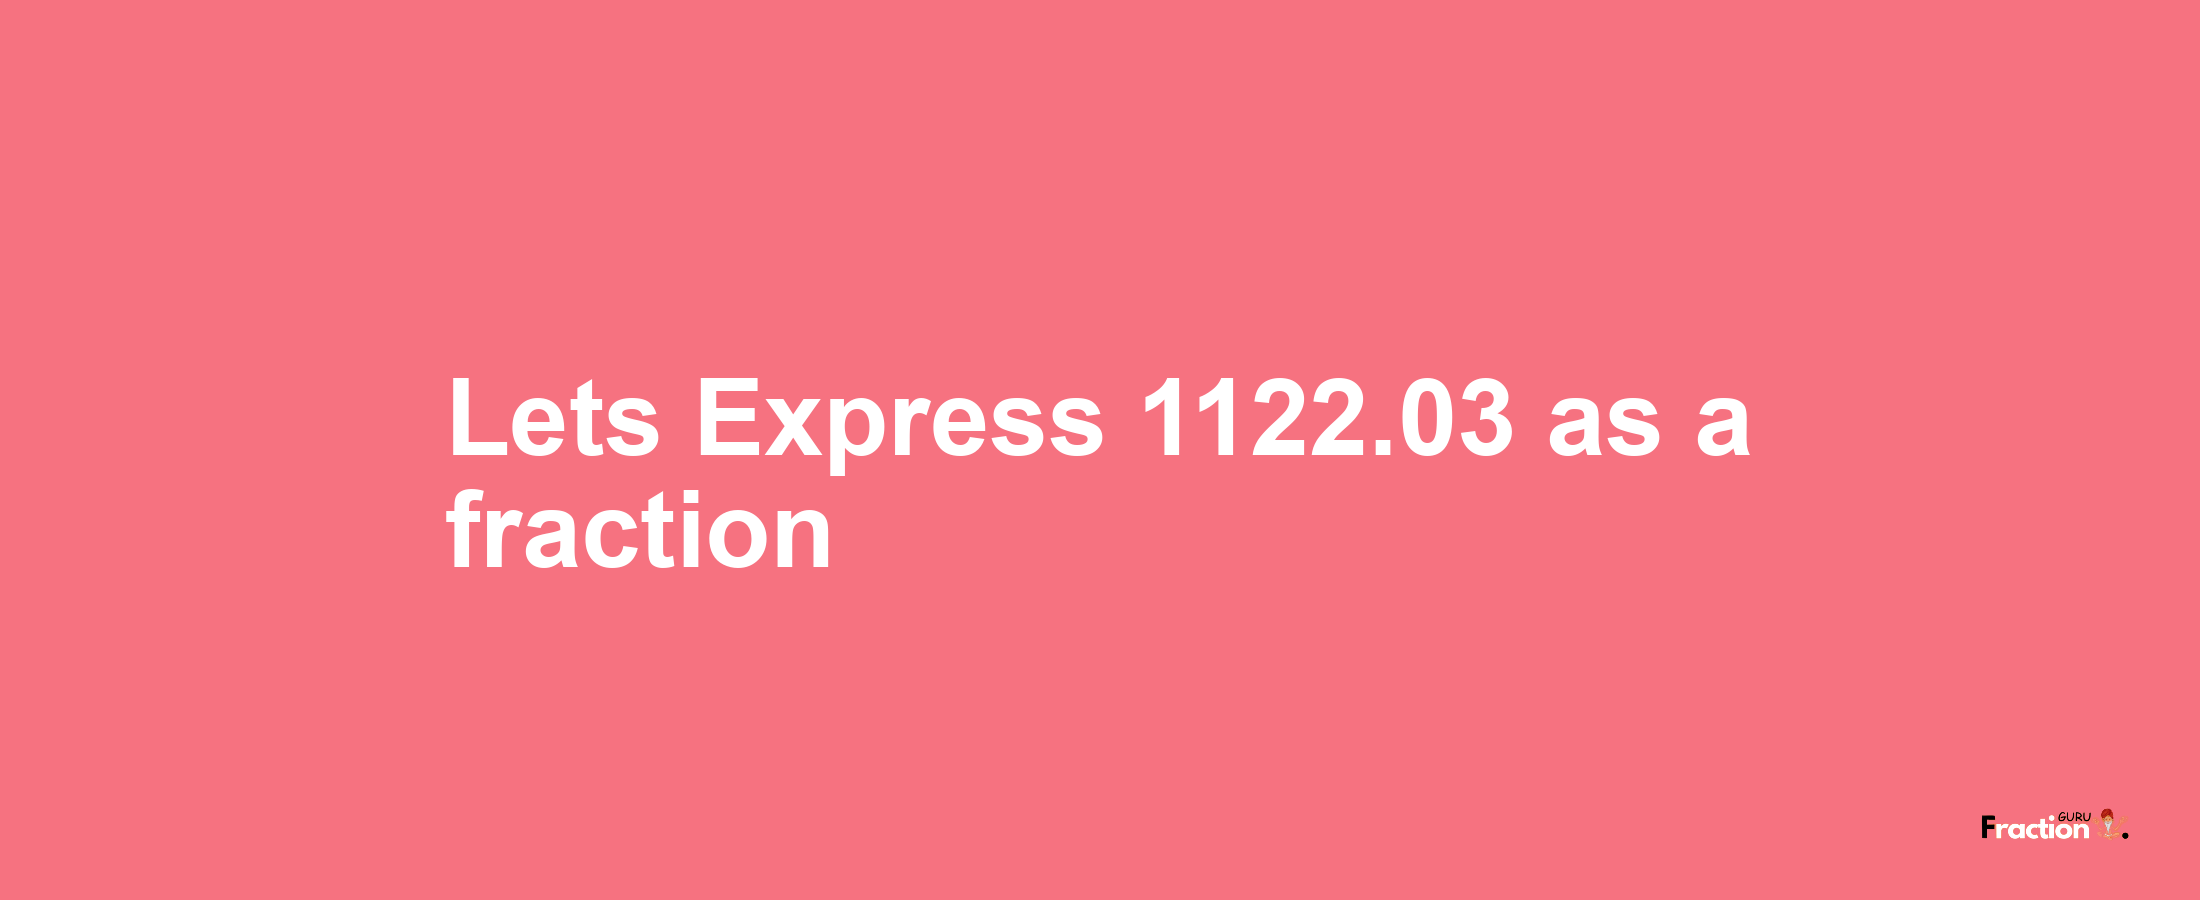 Lets Express 1122.03 as afraction